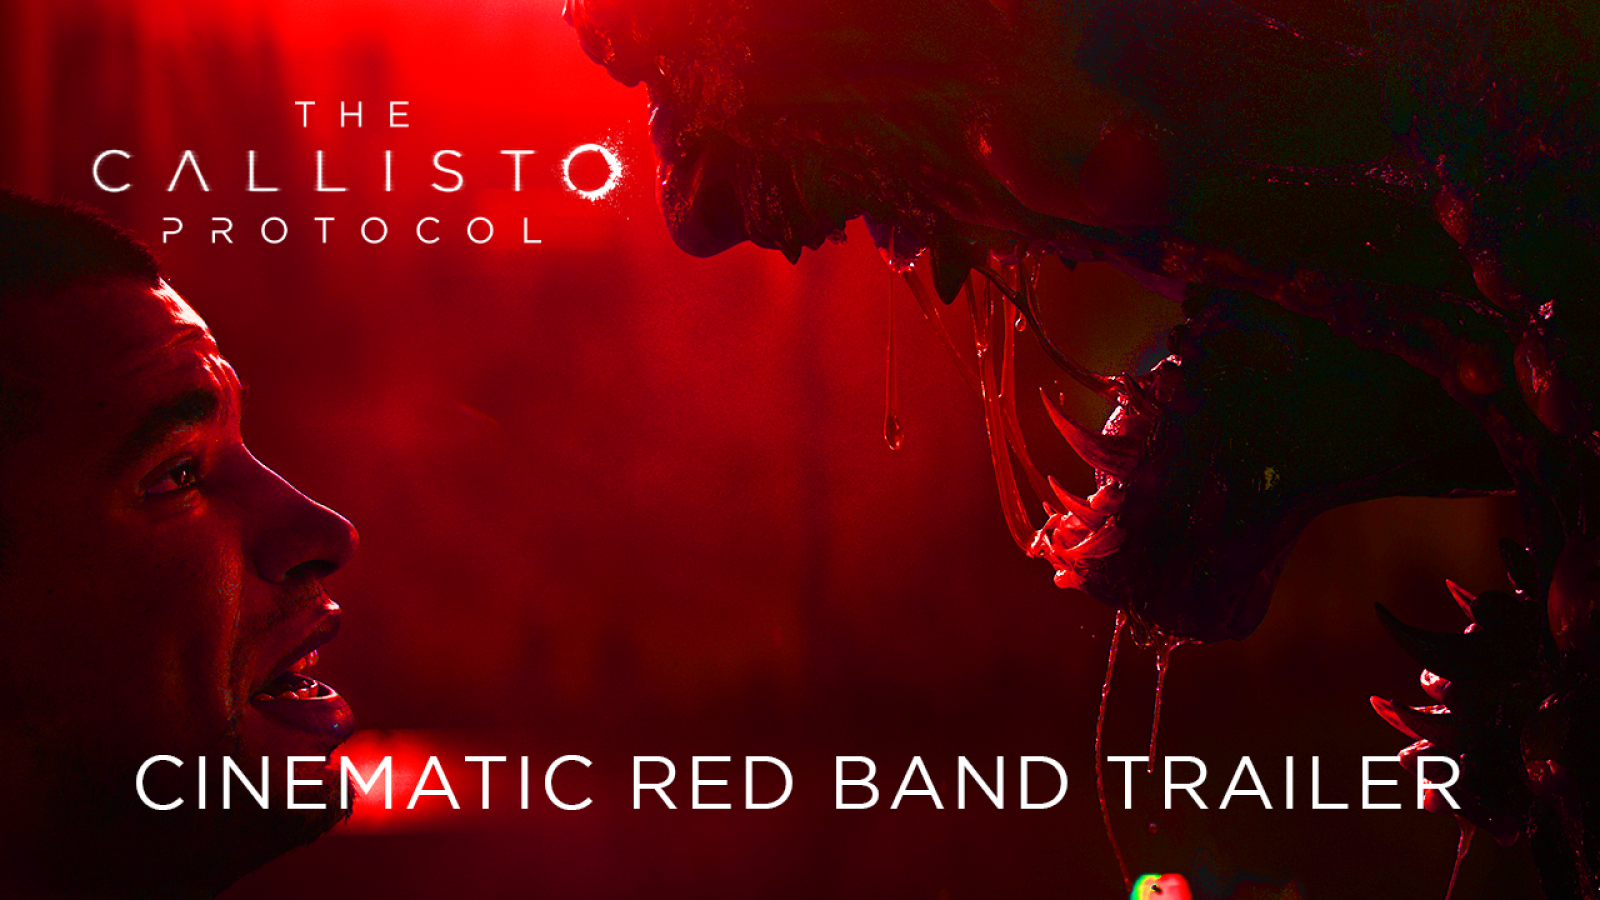 The Callisto Protocol Live Action TV Spot Trailer (Red Band) 